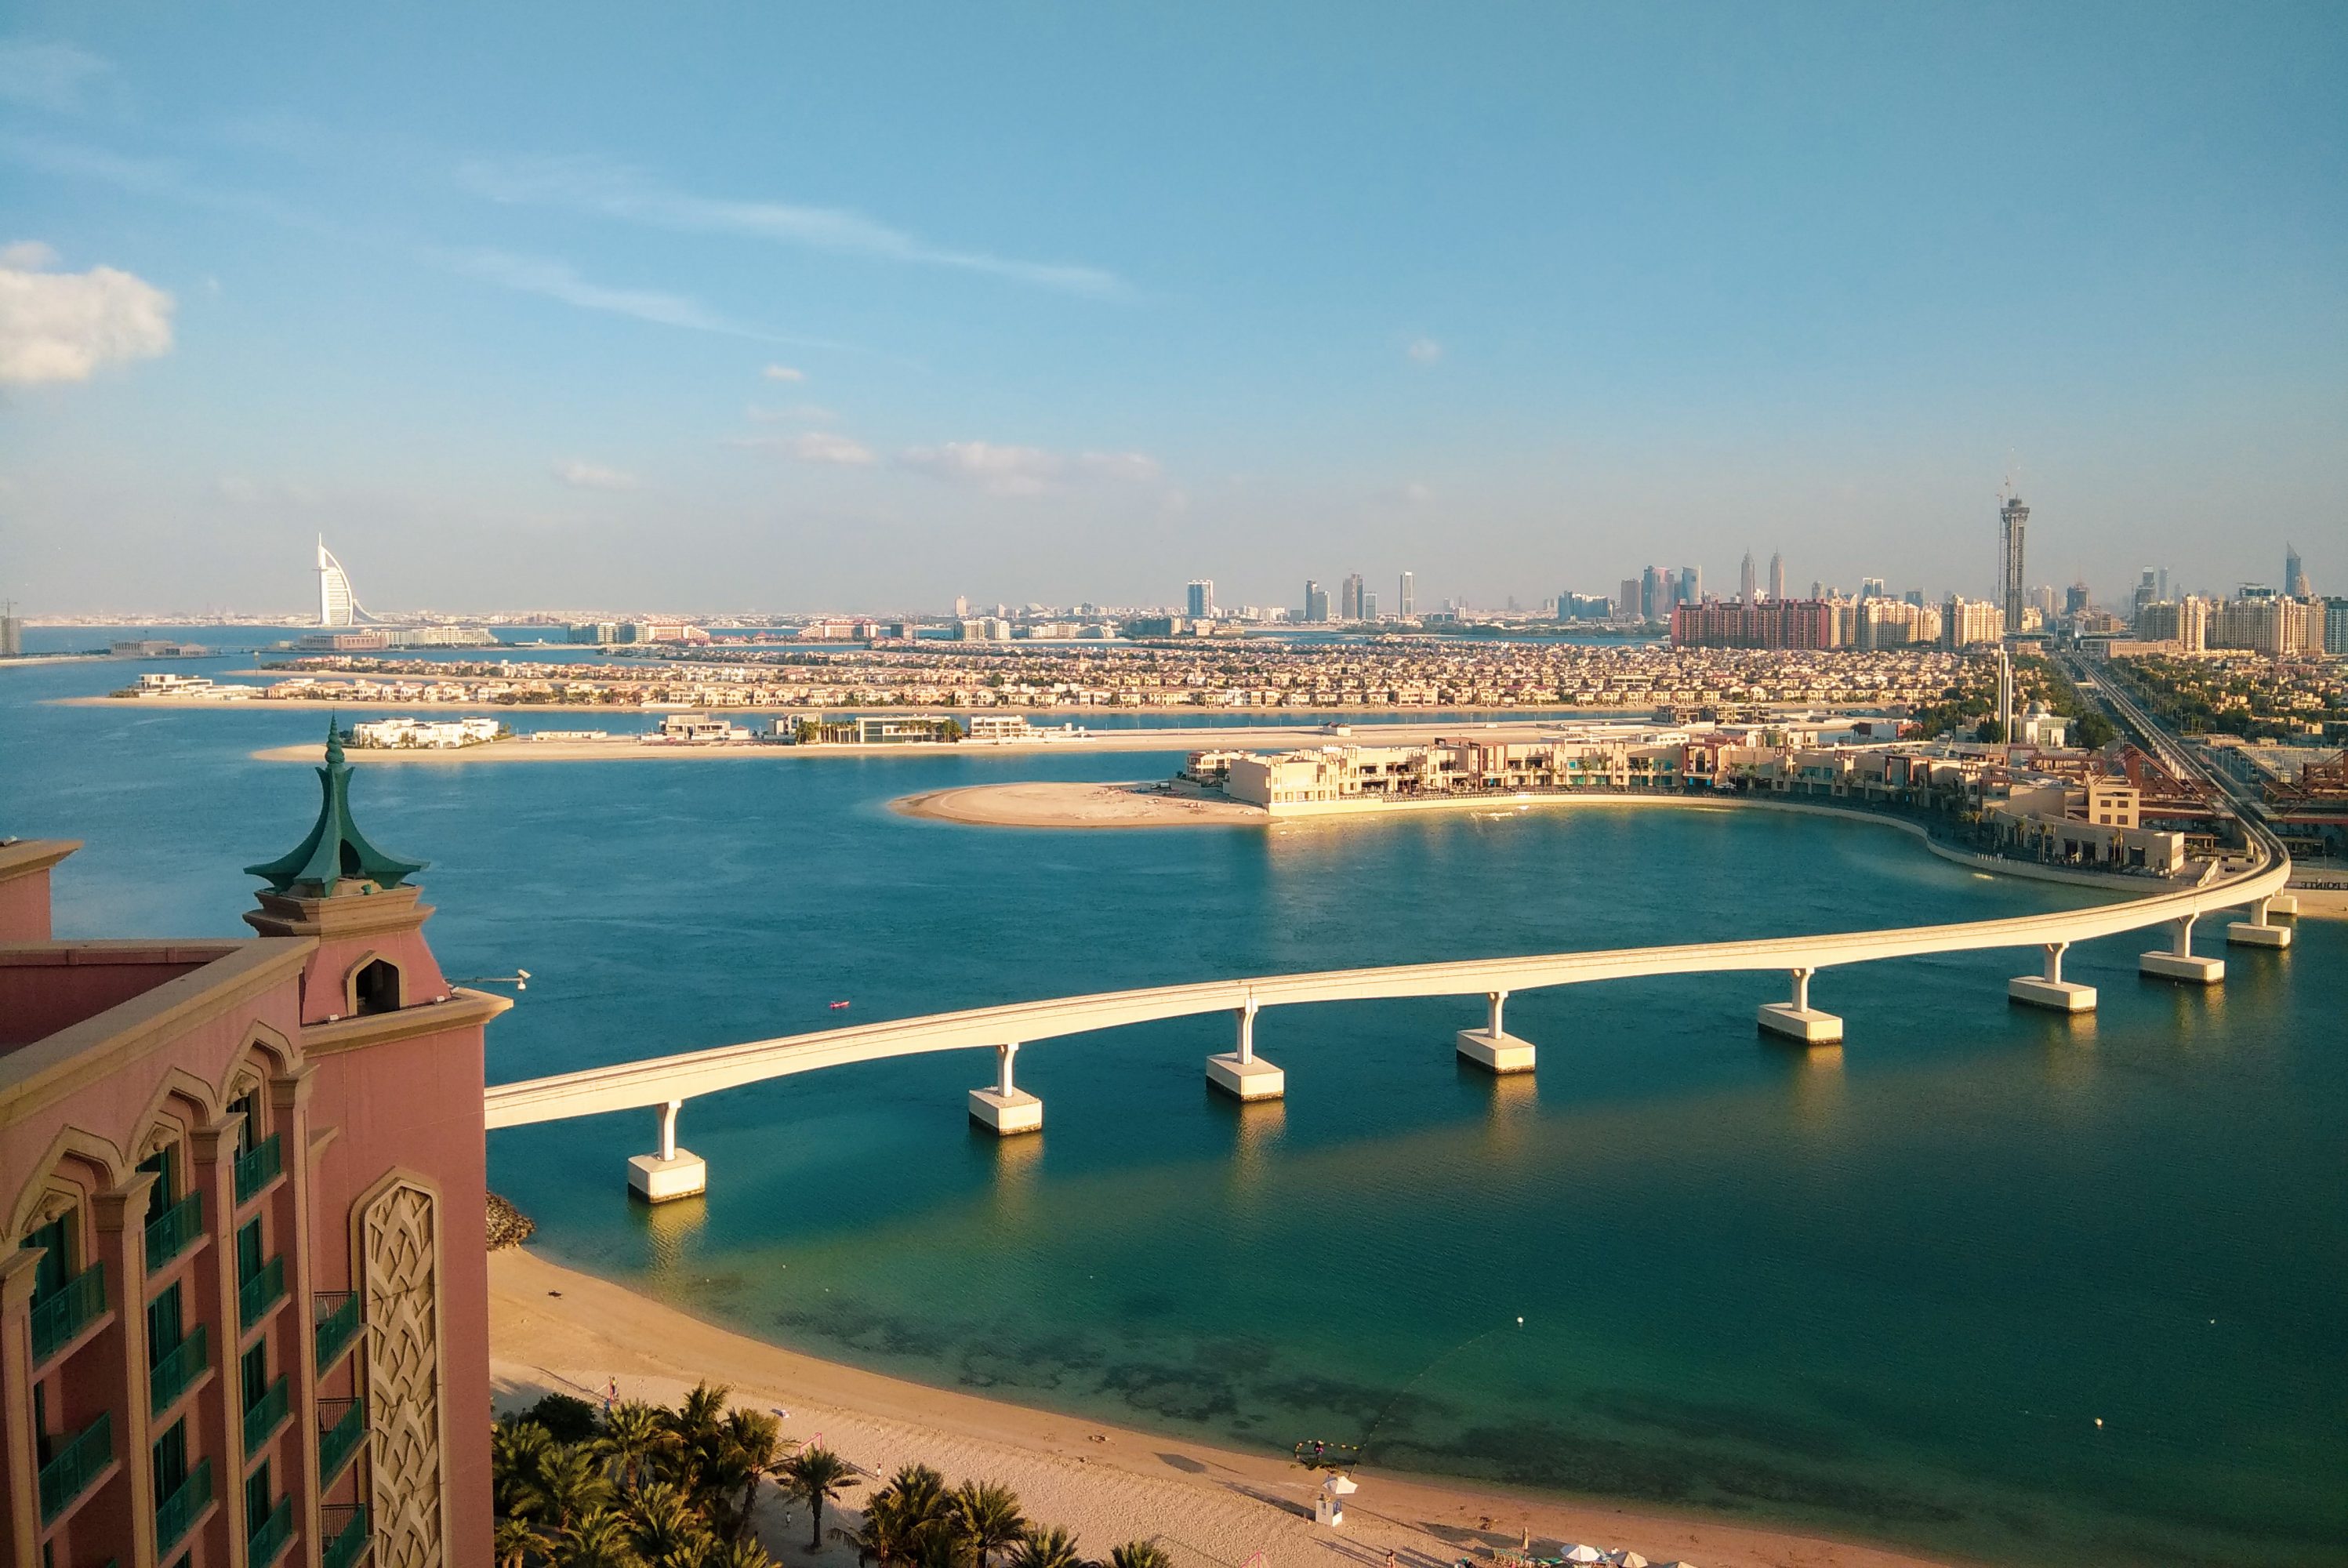 View from the one of the Imperial Club rooms in Atlantis the Palm